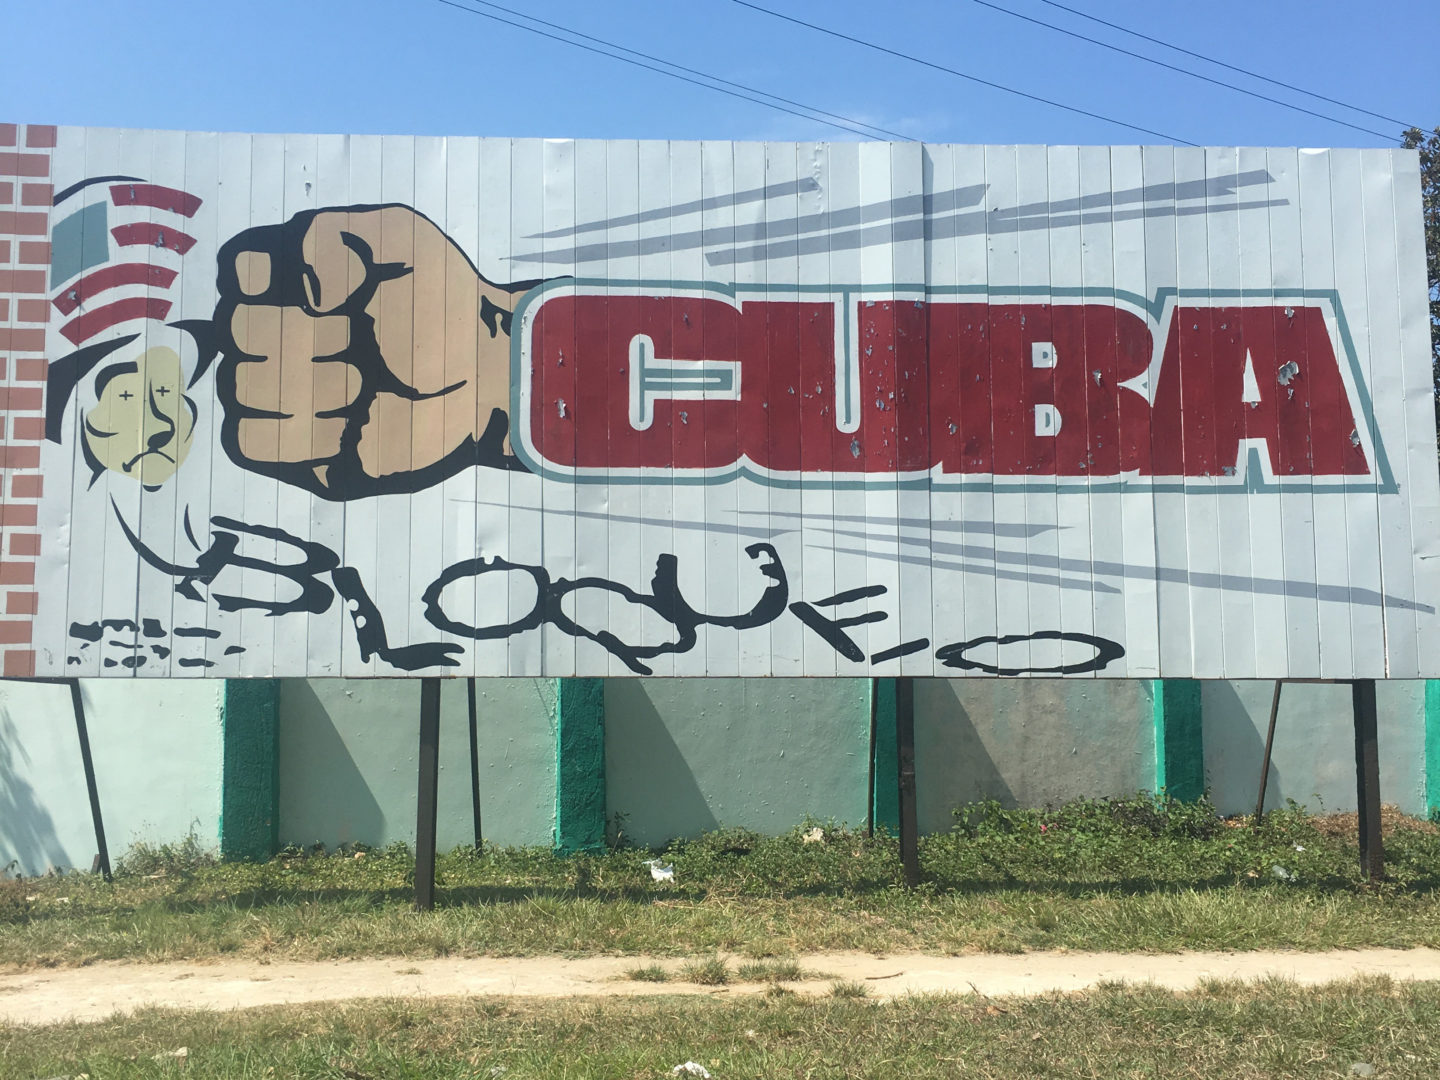 Radical And Anti Imperialist Art On The Streets Of Cuba Yoav Litvin